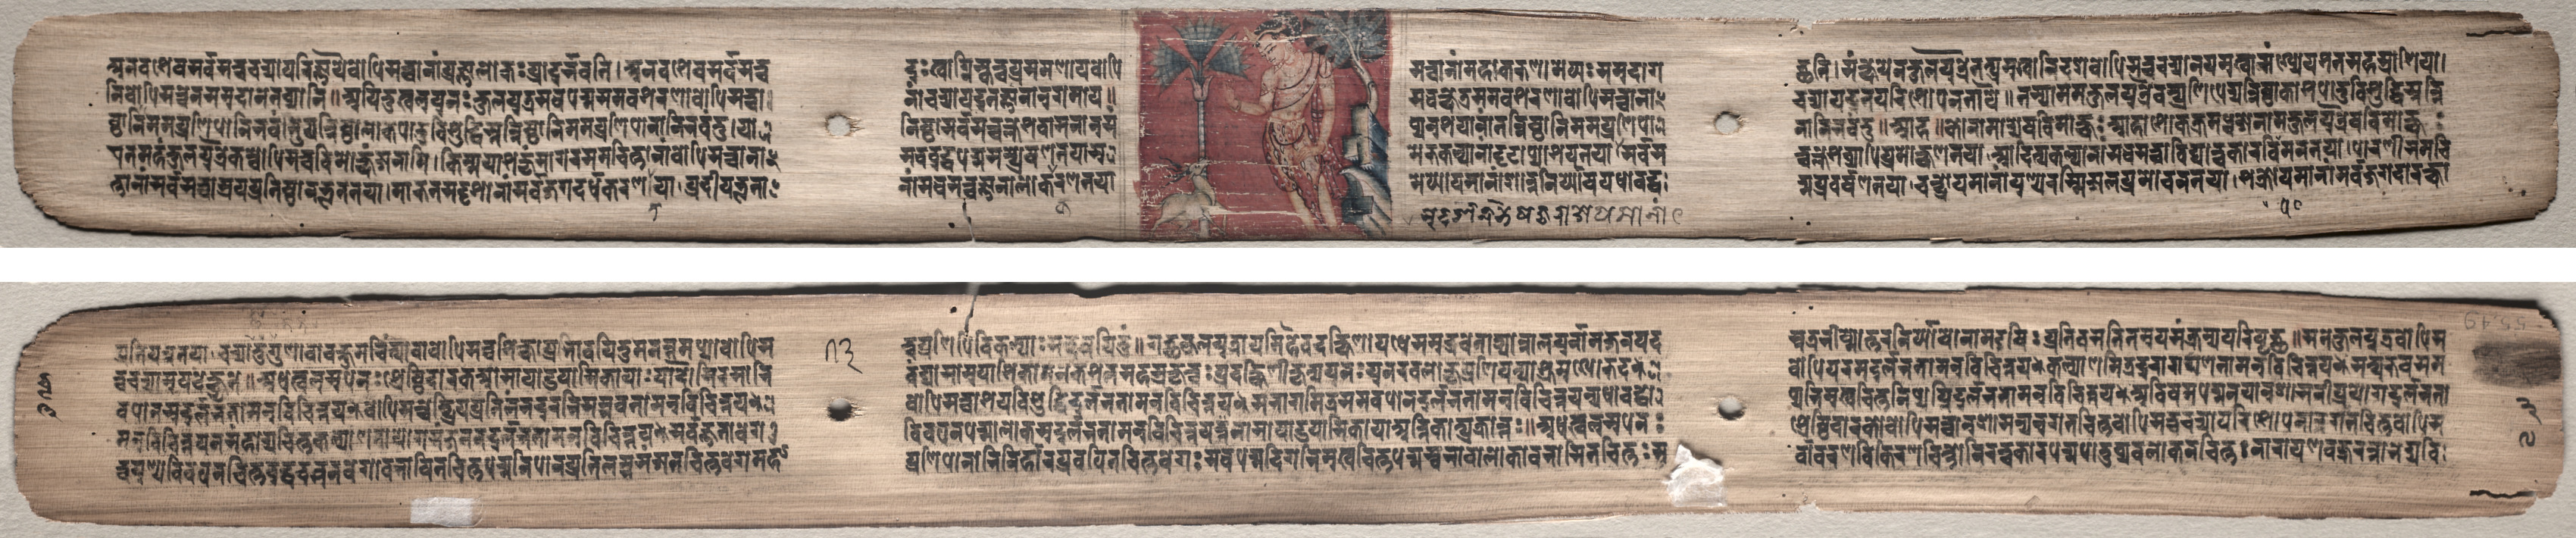 Folio 73 from a Gandavyuha-sutra (Scripture of the Supreme Array): Sudhana and an antelope (recto); text (verso)